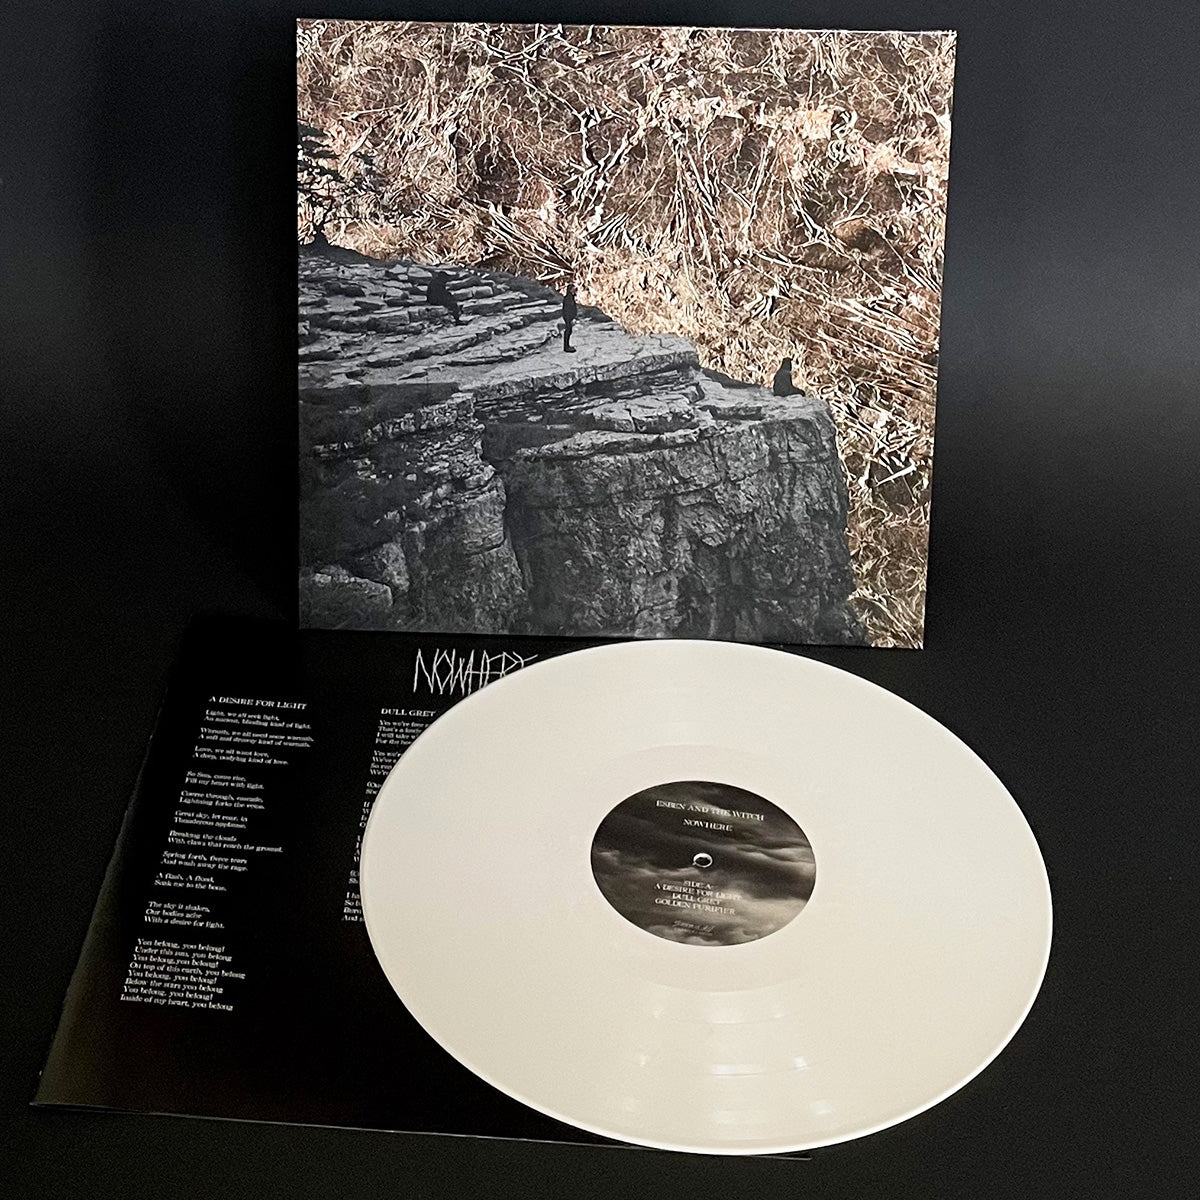 "Nowhere" Limited Edition White LP - Esben And The Witch - Haus Nostromo